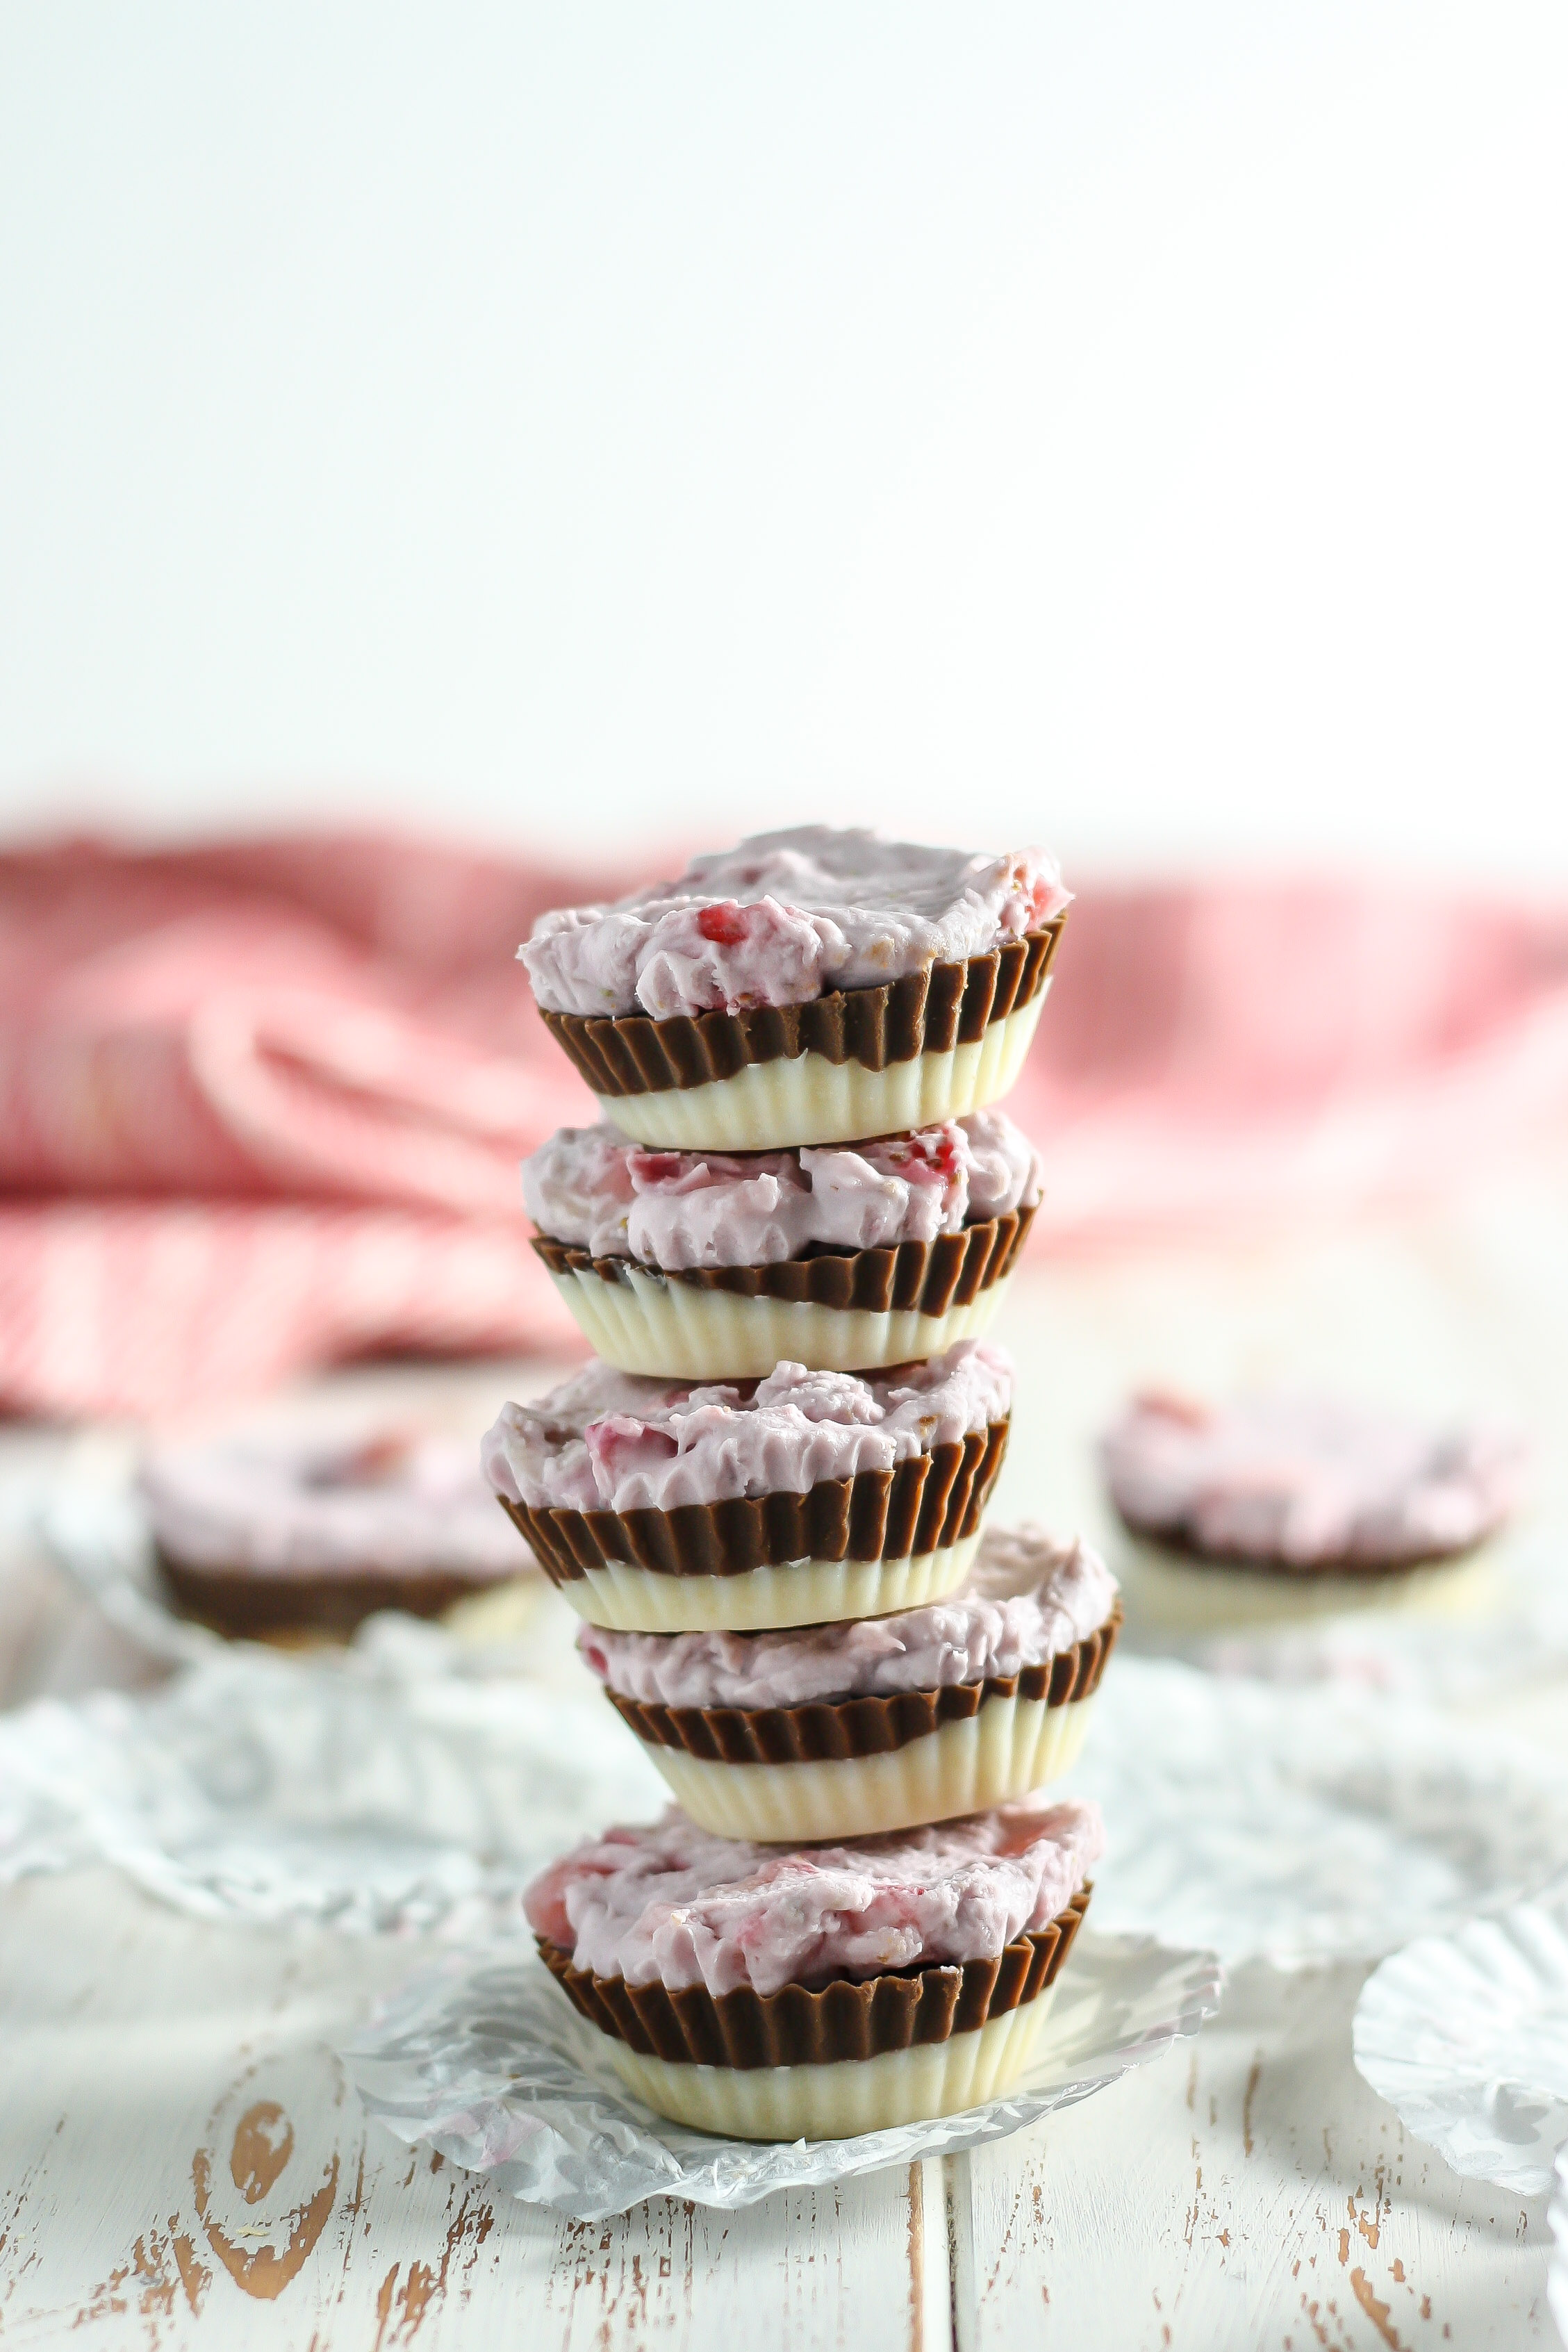 A layered mix of coconut butter in the classic ice cream flavor, these Vegan Neapolitan Coconut Butter Cups are a healthier way to indulge for Valentine's Day.